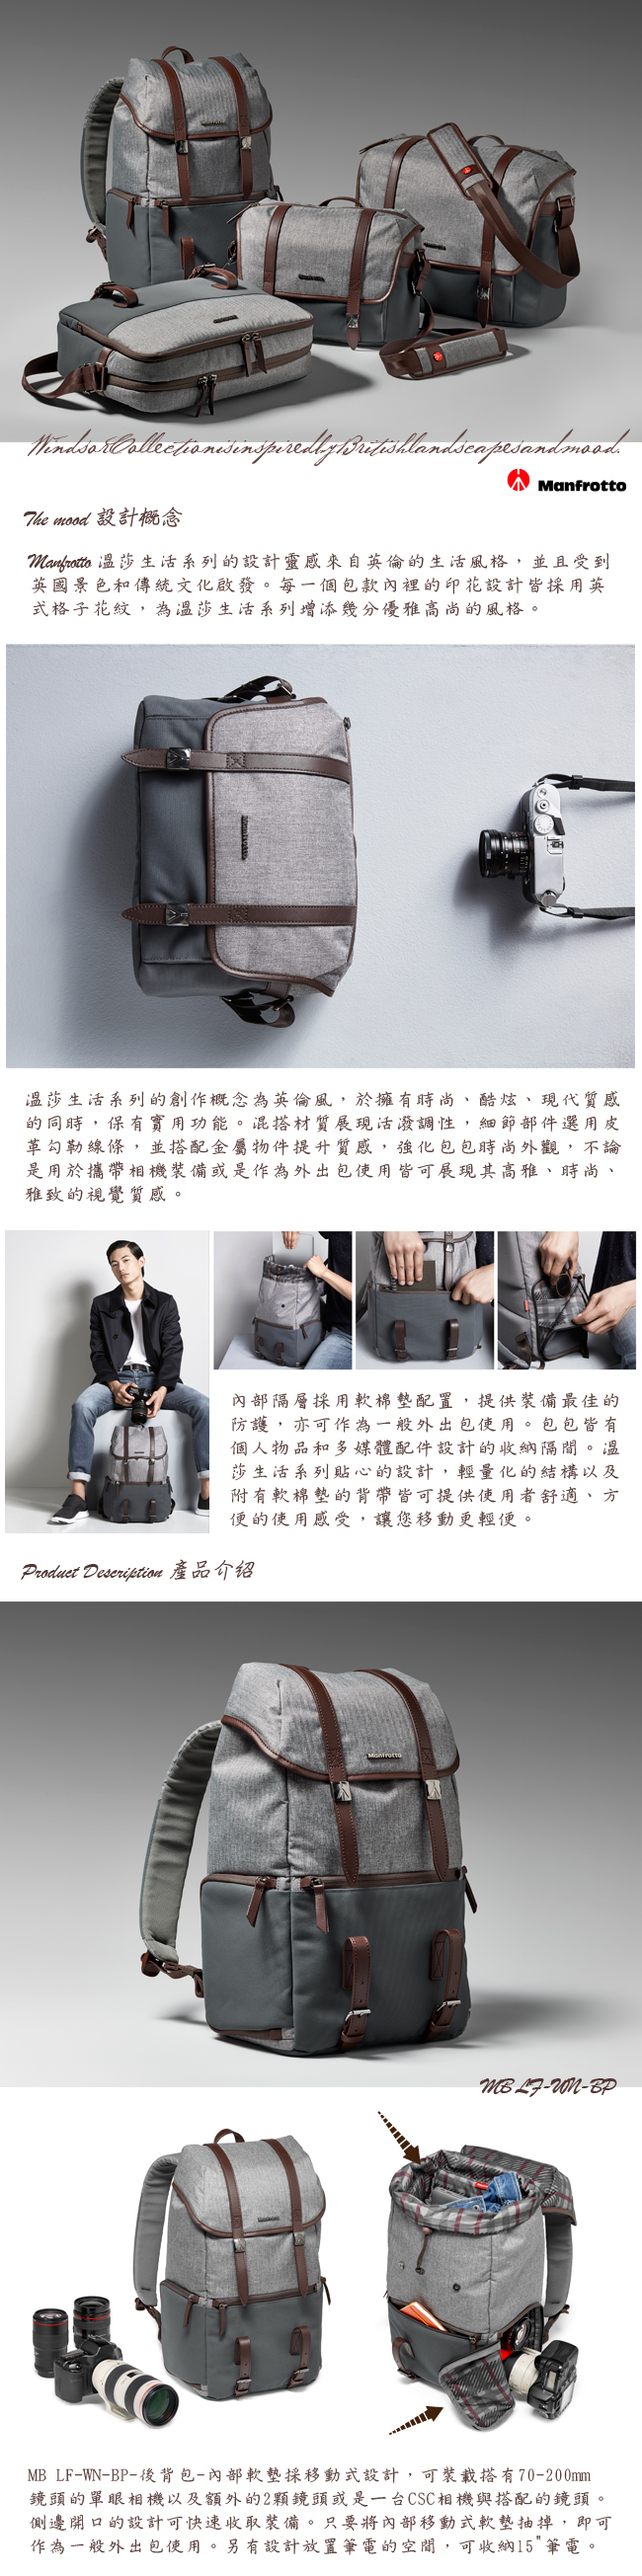 Manfrotto 溫莎系列後背包 Lifestyle Windsor Backpack